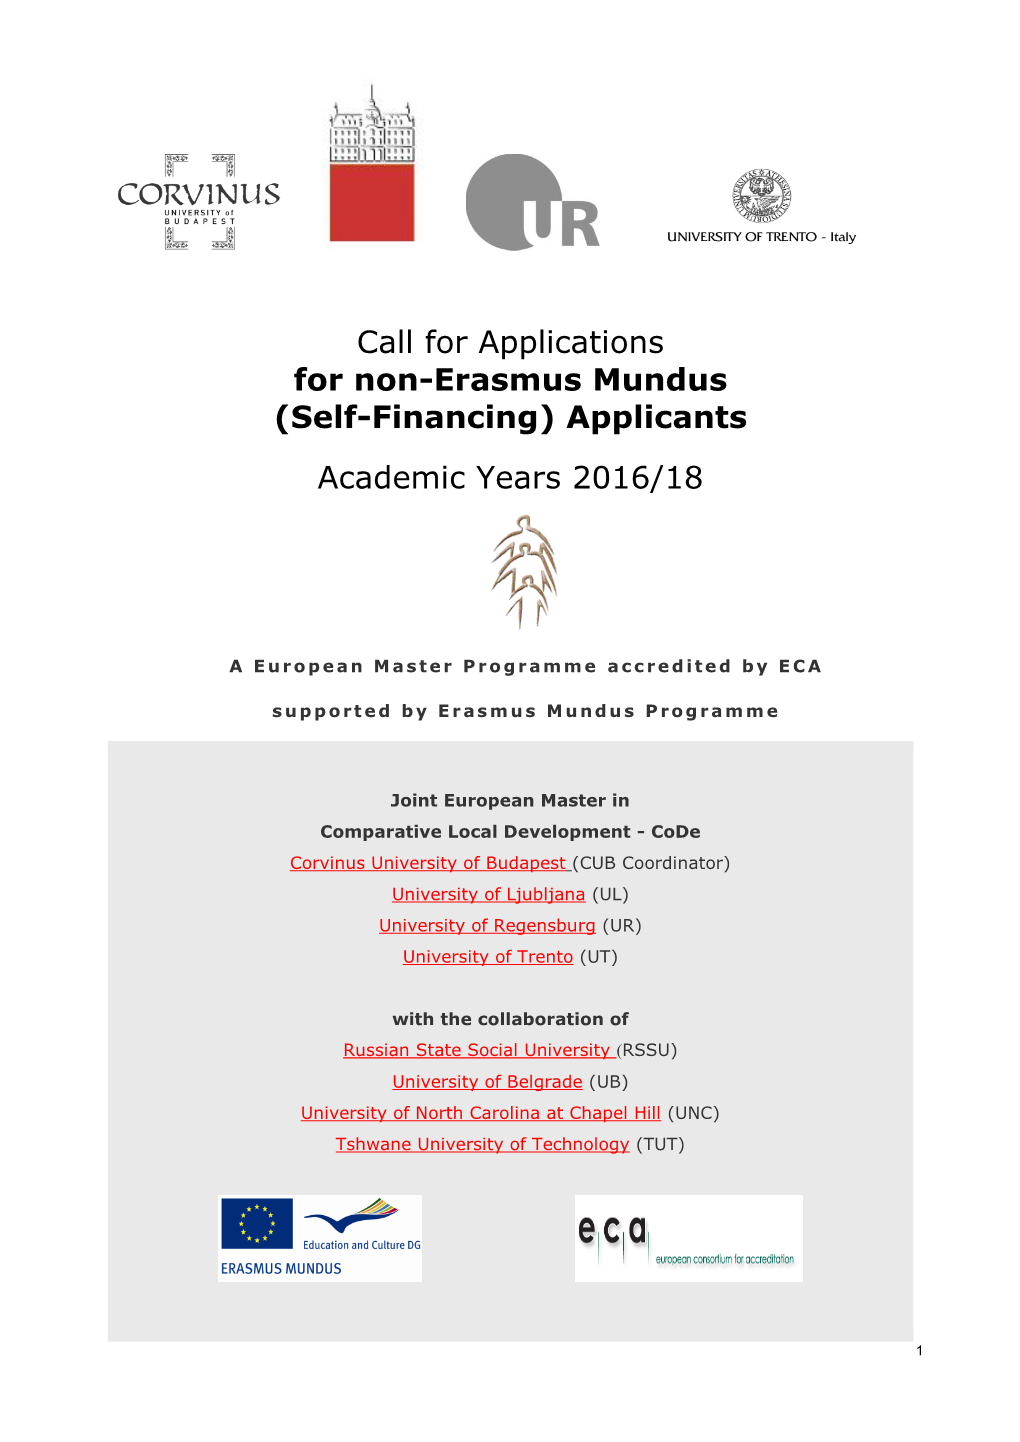 Call for Applications for Non-Erasmus Mundus (Self-Financing) Applicants